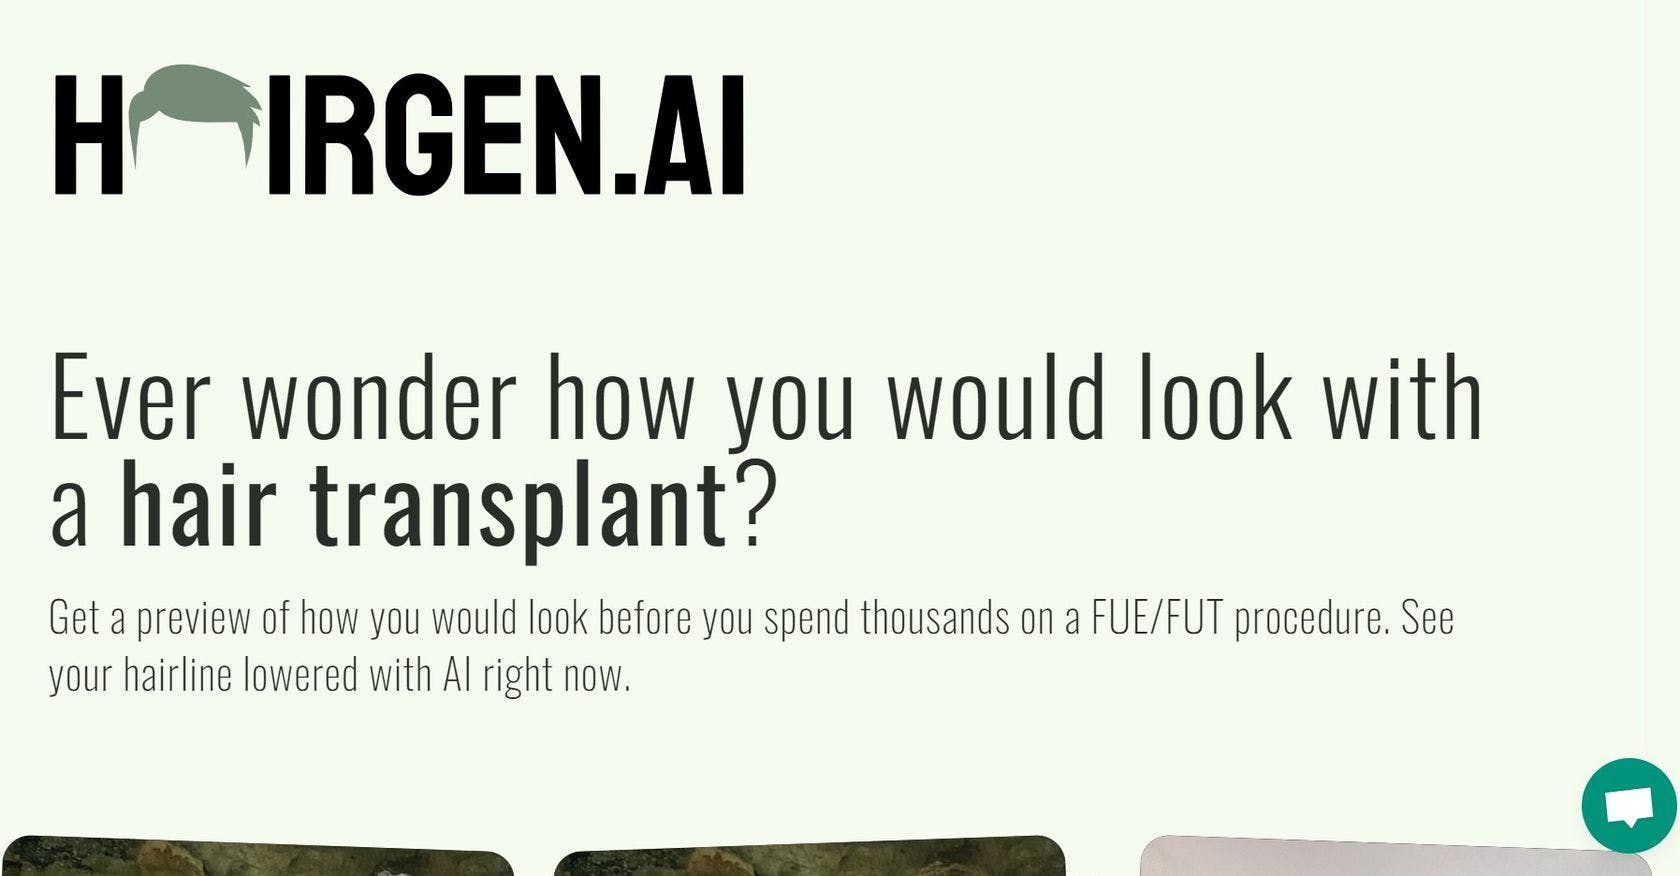 Hairgen AI featured image